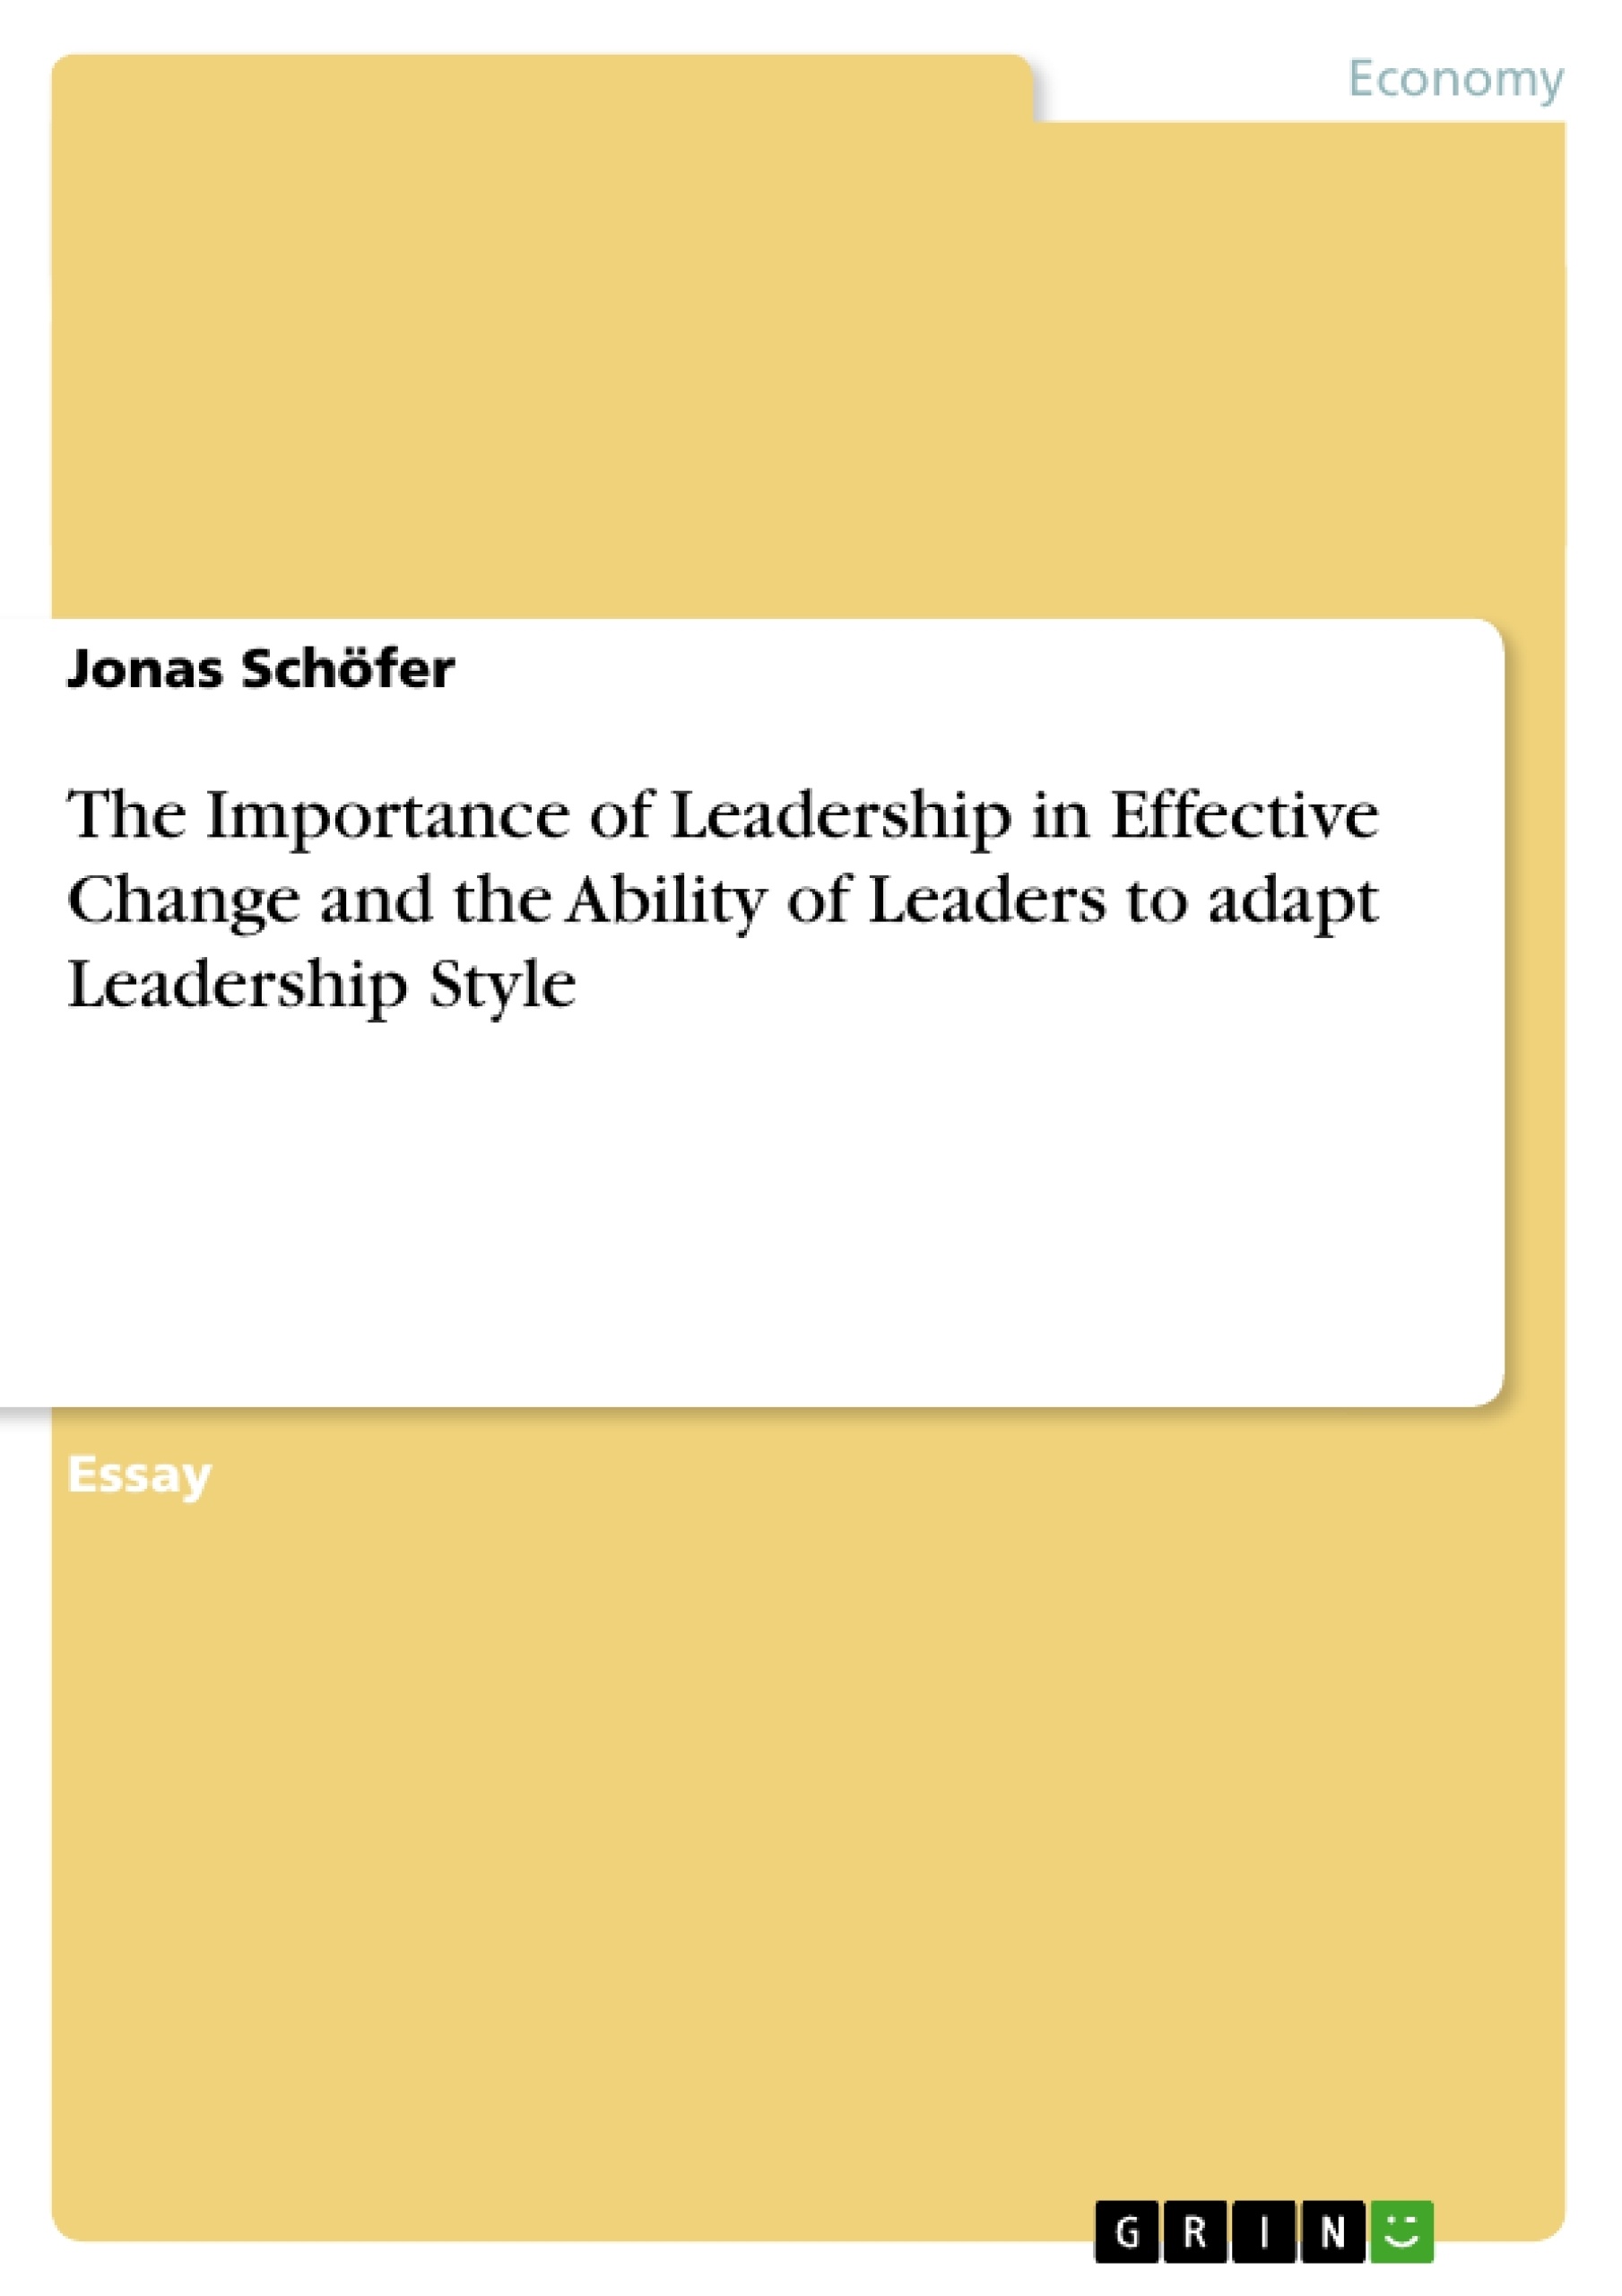 Title: The Importance of Leadership in Effective Change and the Ability of Leaders to adapt Leadership Style